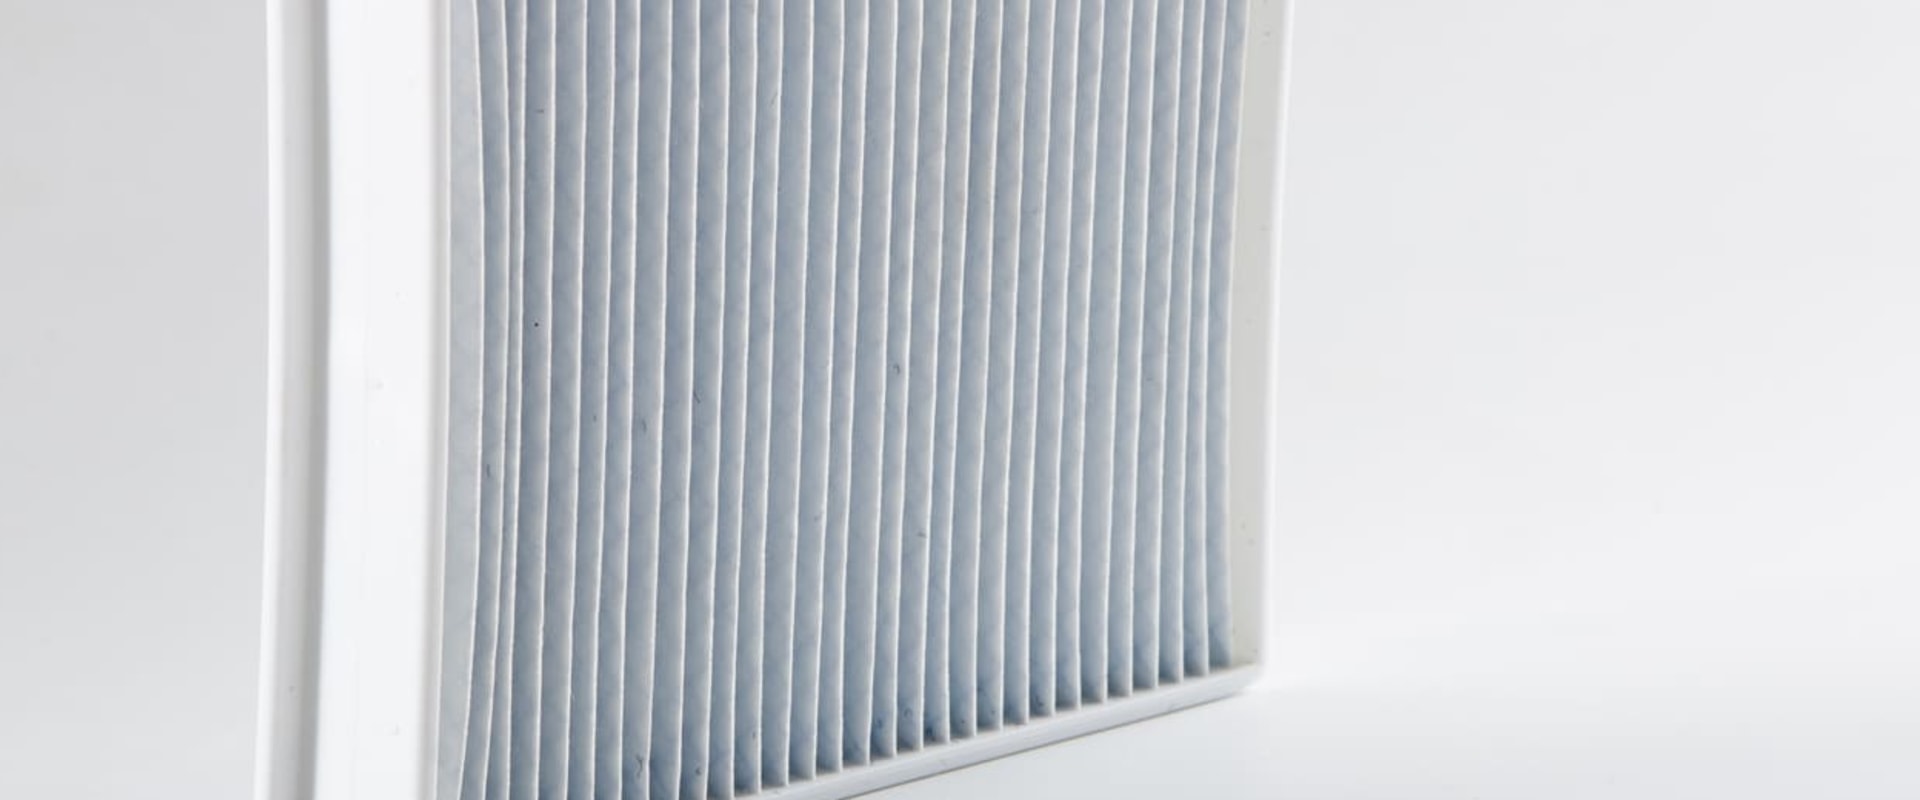 What is the PM Rating for MERV 13 Air Filters?